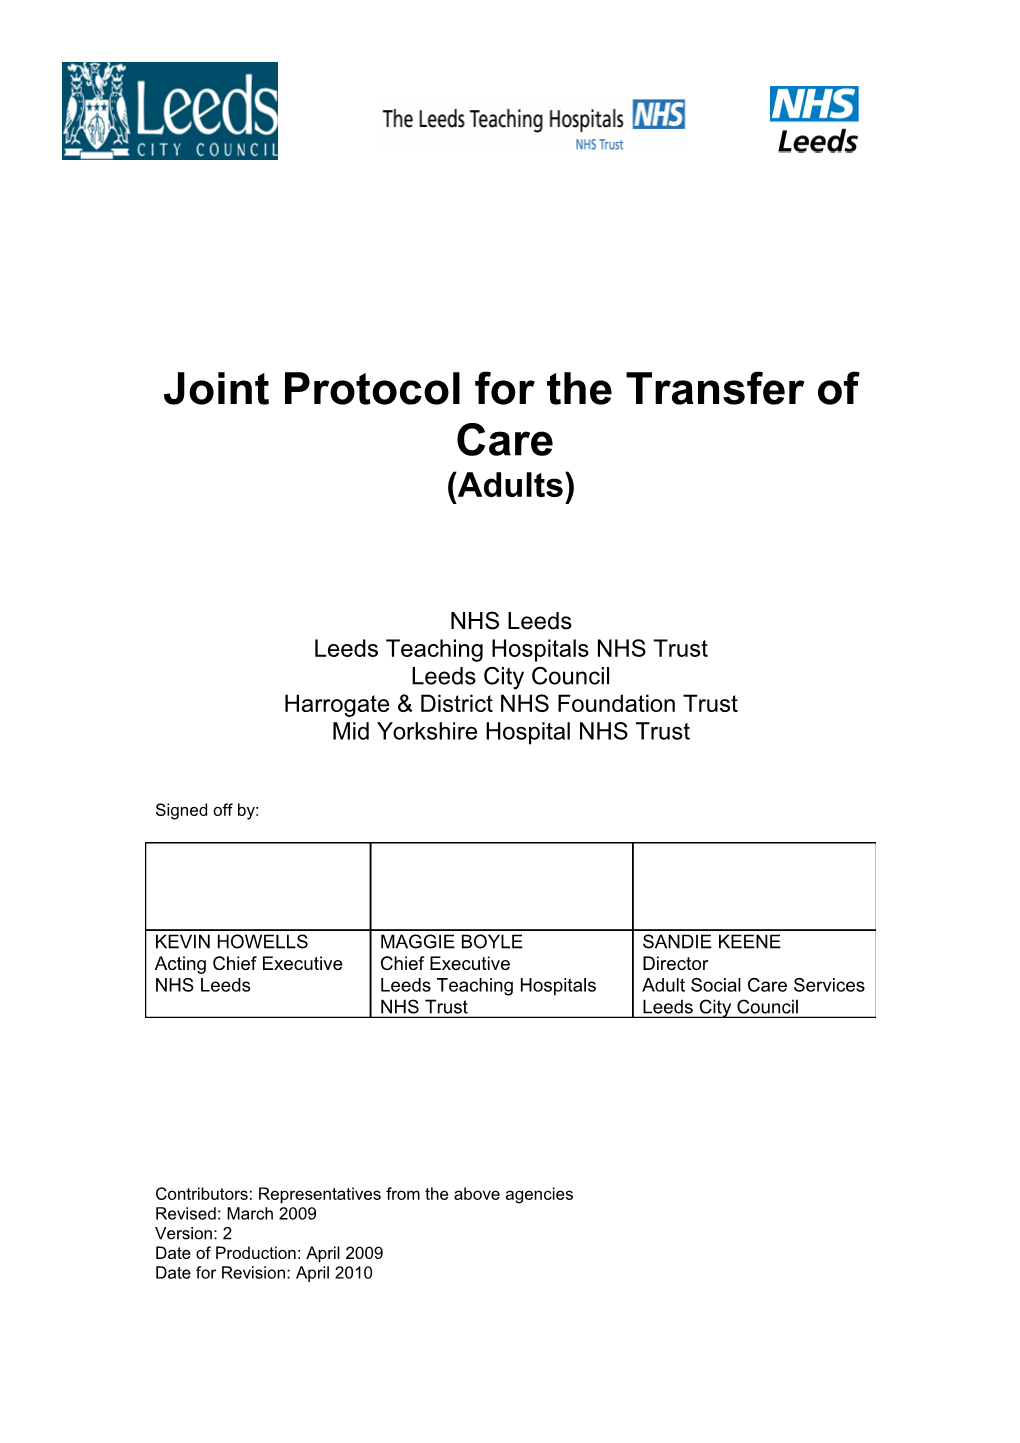 Joint Protocol for the Transfer of Care